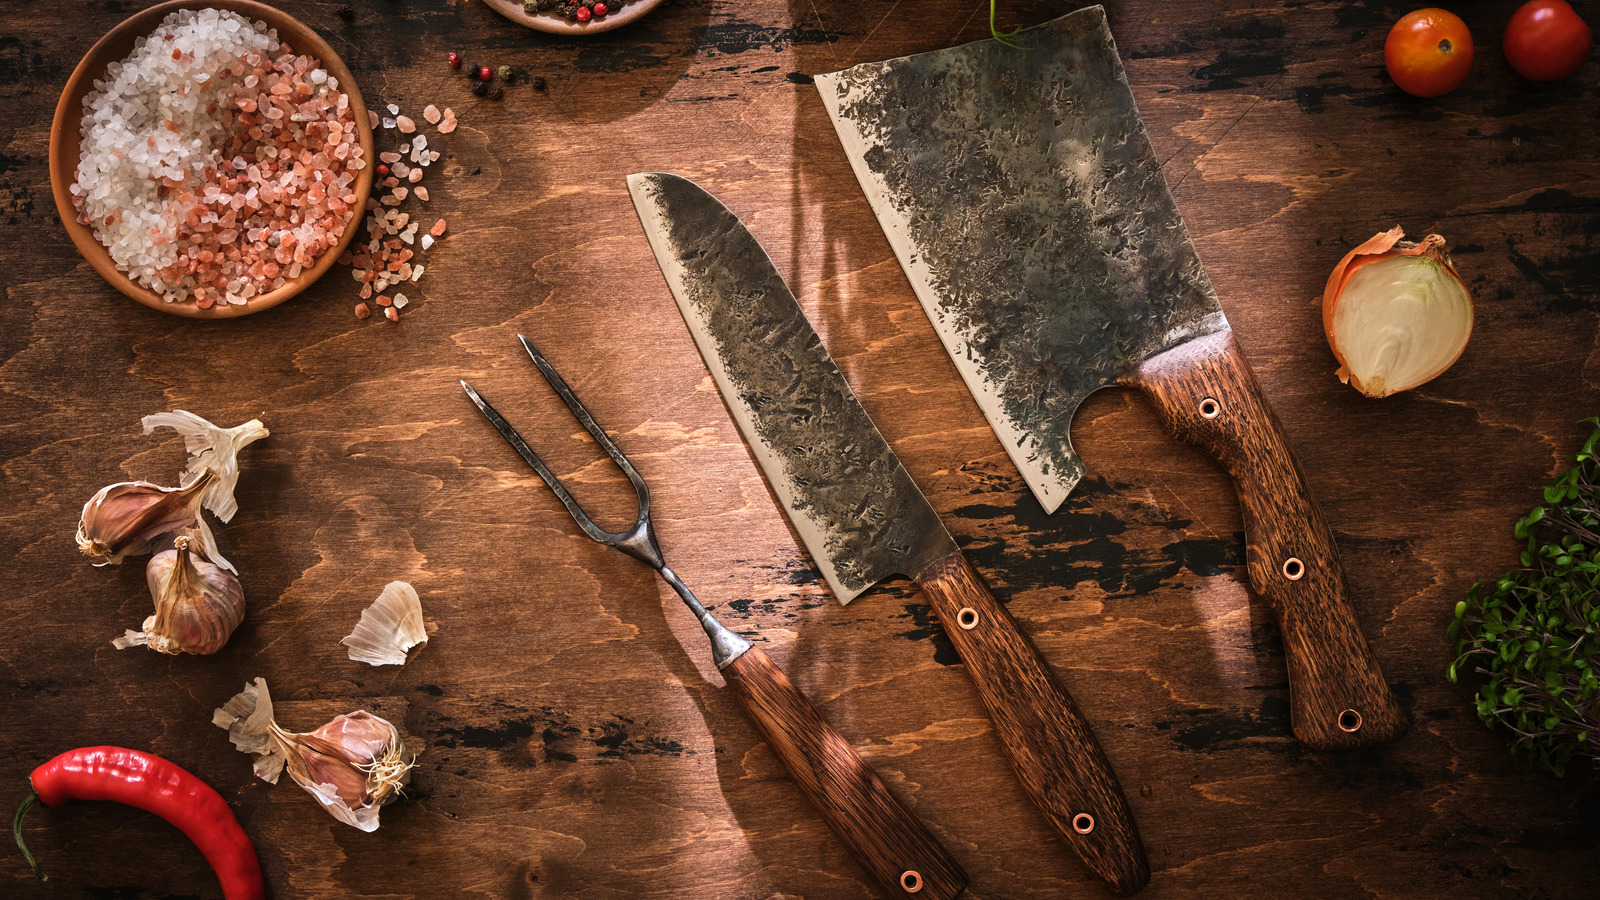 Why You Need a Butcher Knife in Your Kitchen